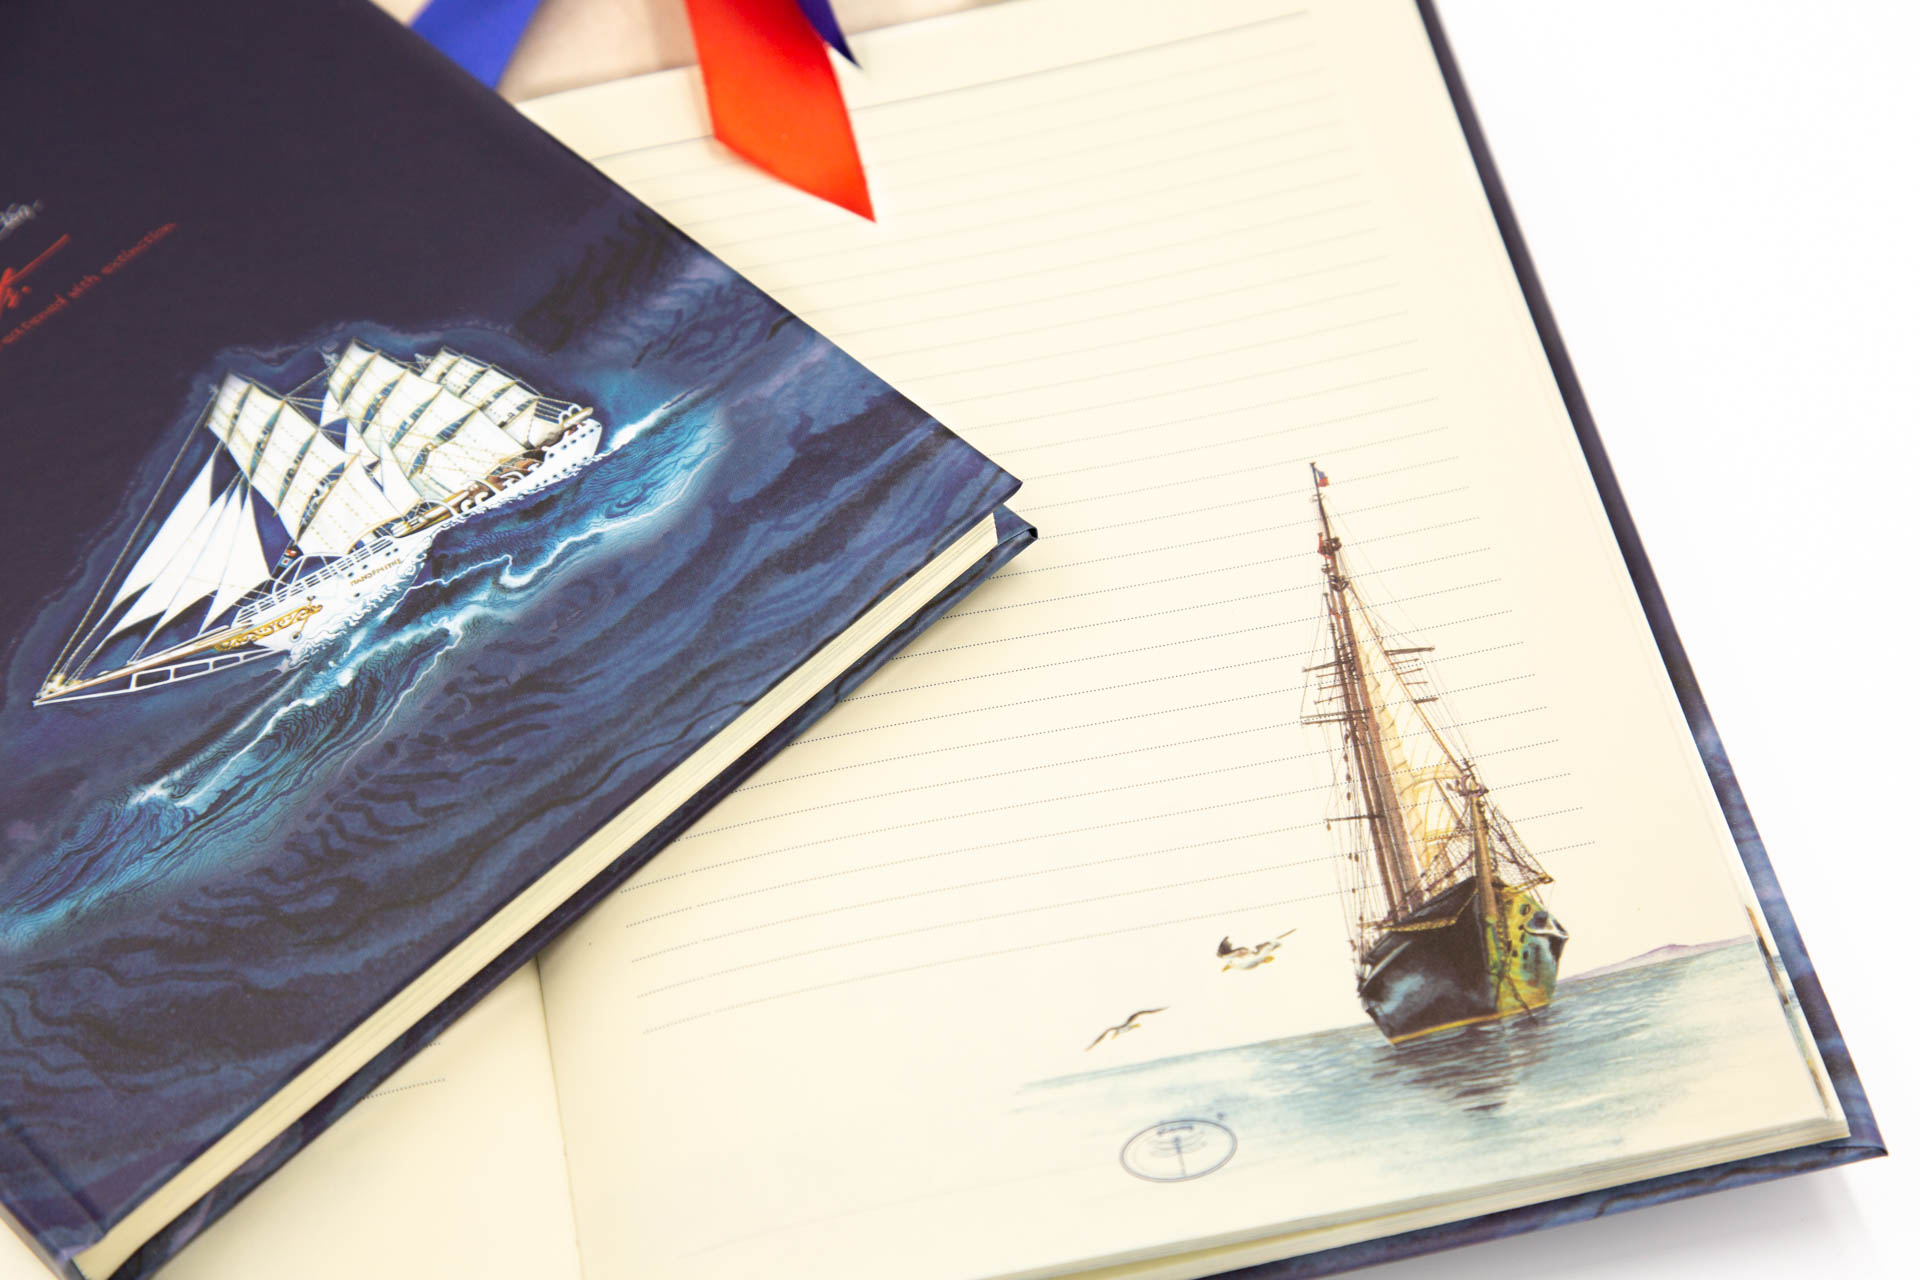 Personal notebook "Sailboats" - Details